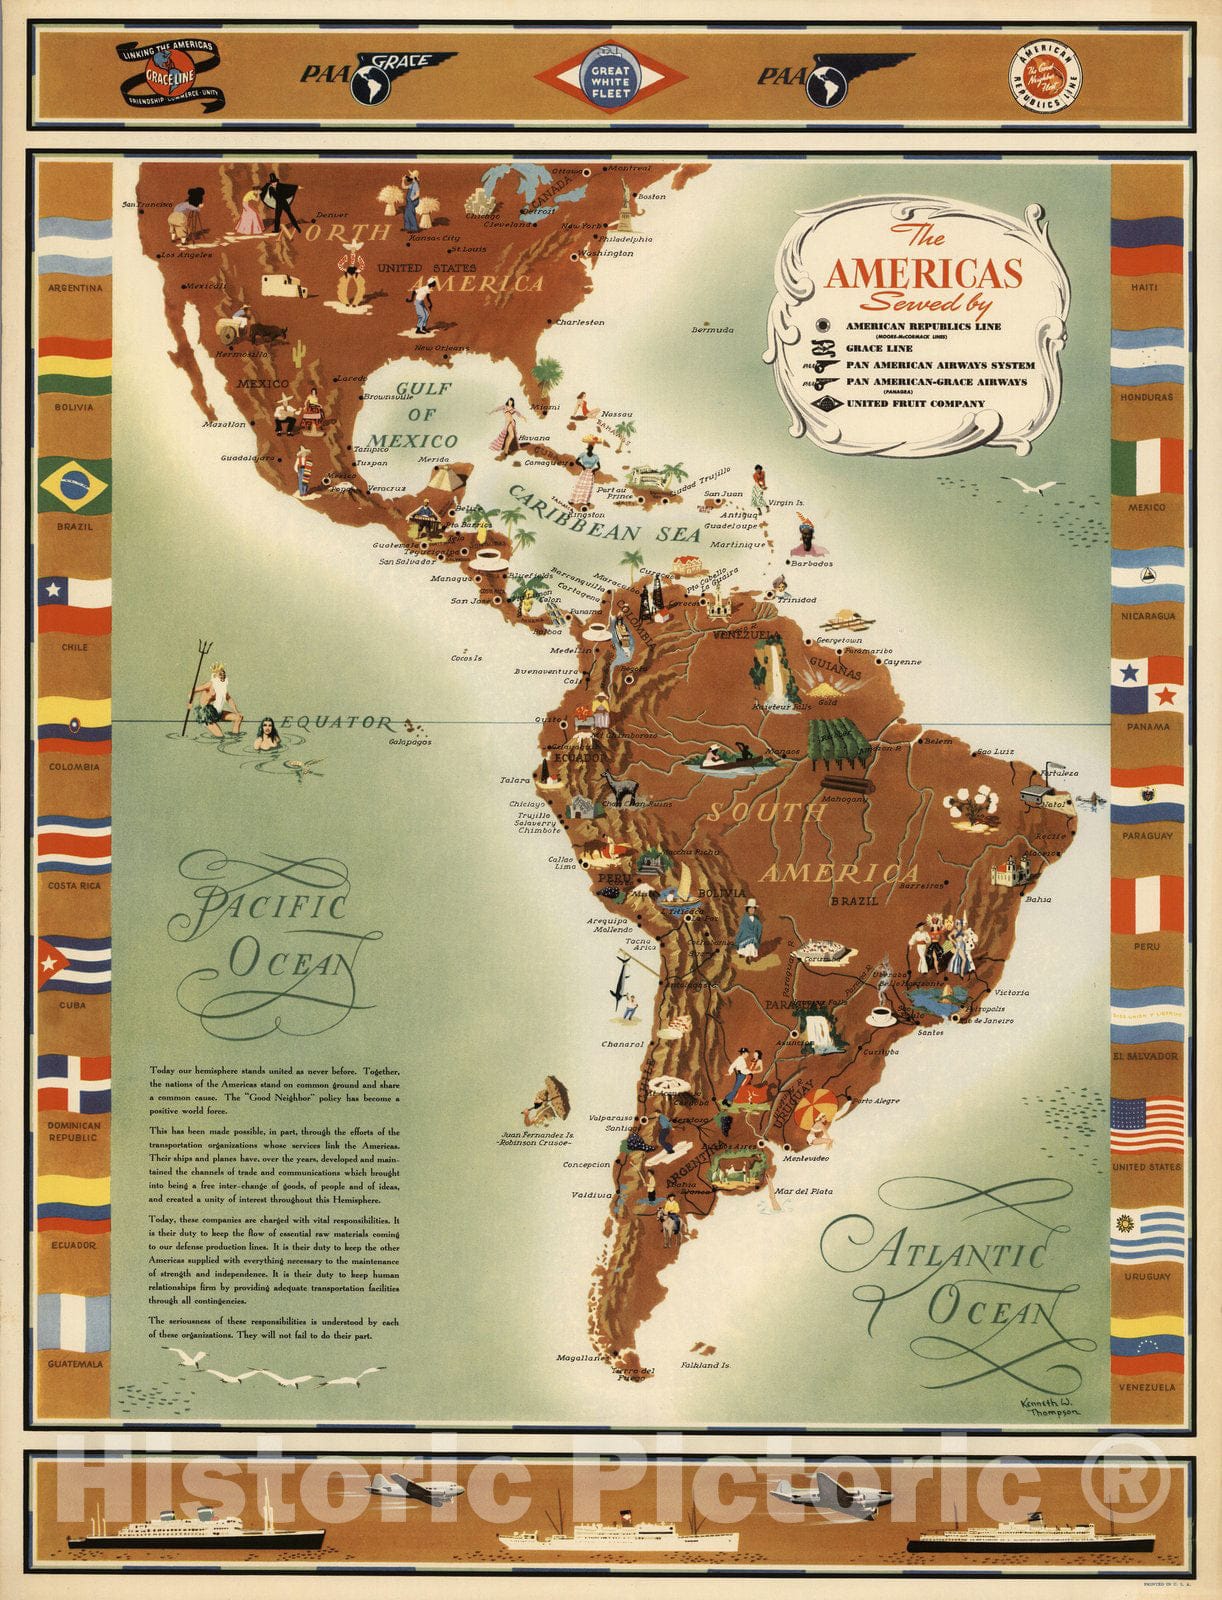 Historic Map : The Americas Served by American Republic Lines 1948 - Vintage Wall Art